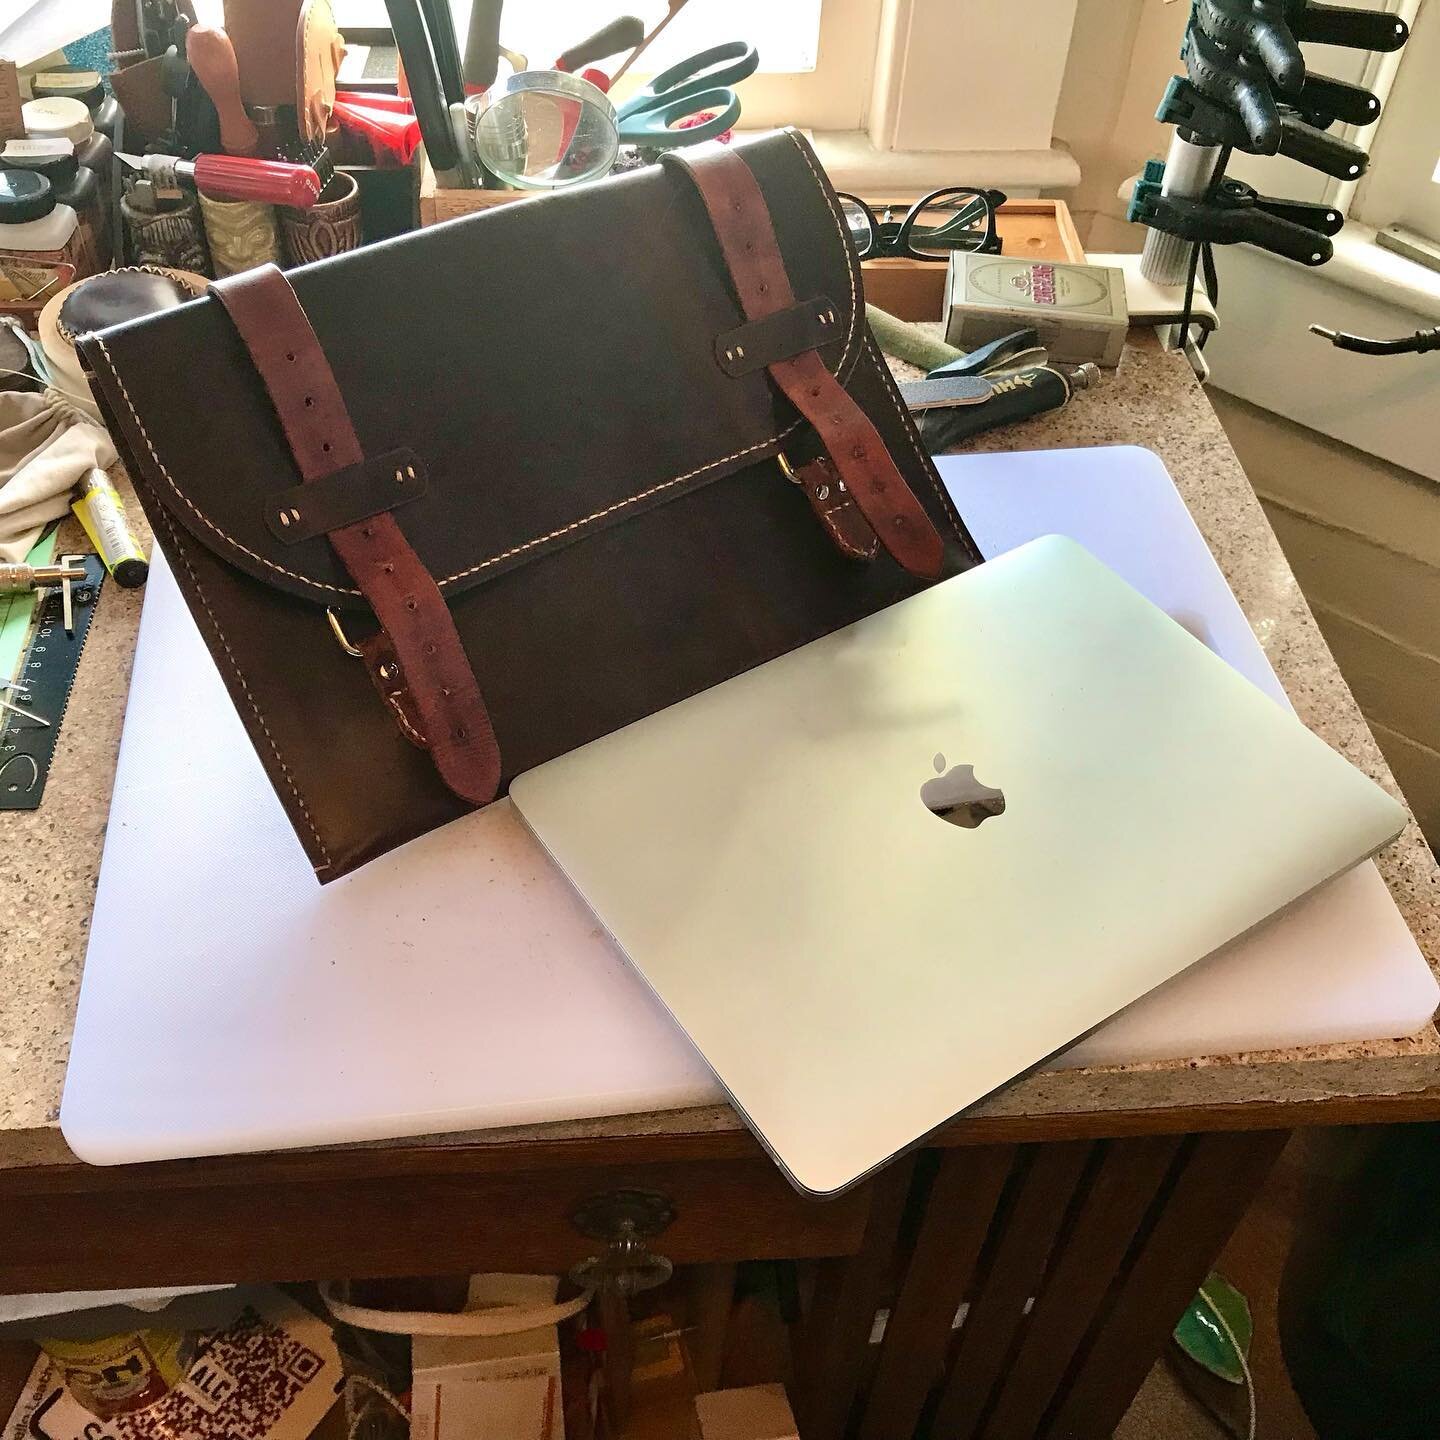 Decided to make a matching MacBook cover to go with the new backpack. Link to the store in Bio. #ALC #Leather #LeatherCraft #COVIDSkill #HandCut #HandStitched #HandDyed #HandMade #KeyWest #LocalArtist #AlphaBrain